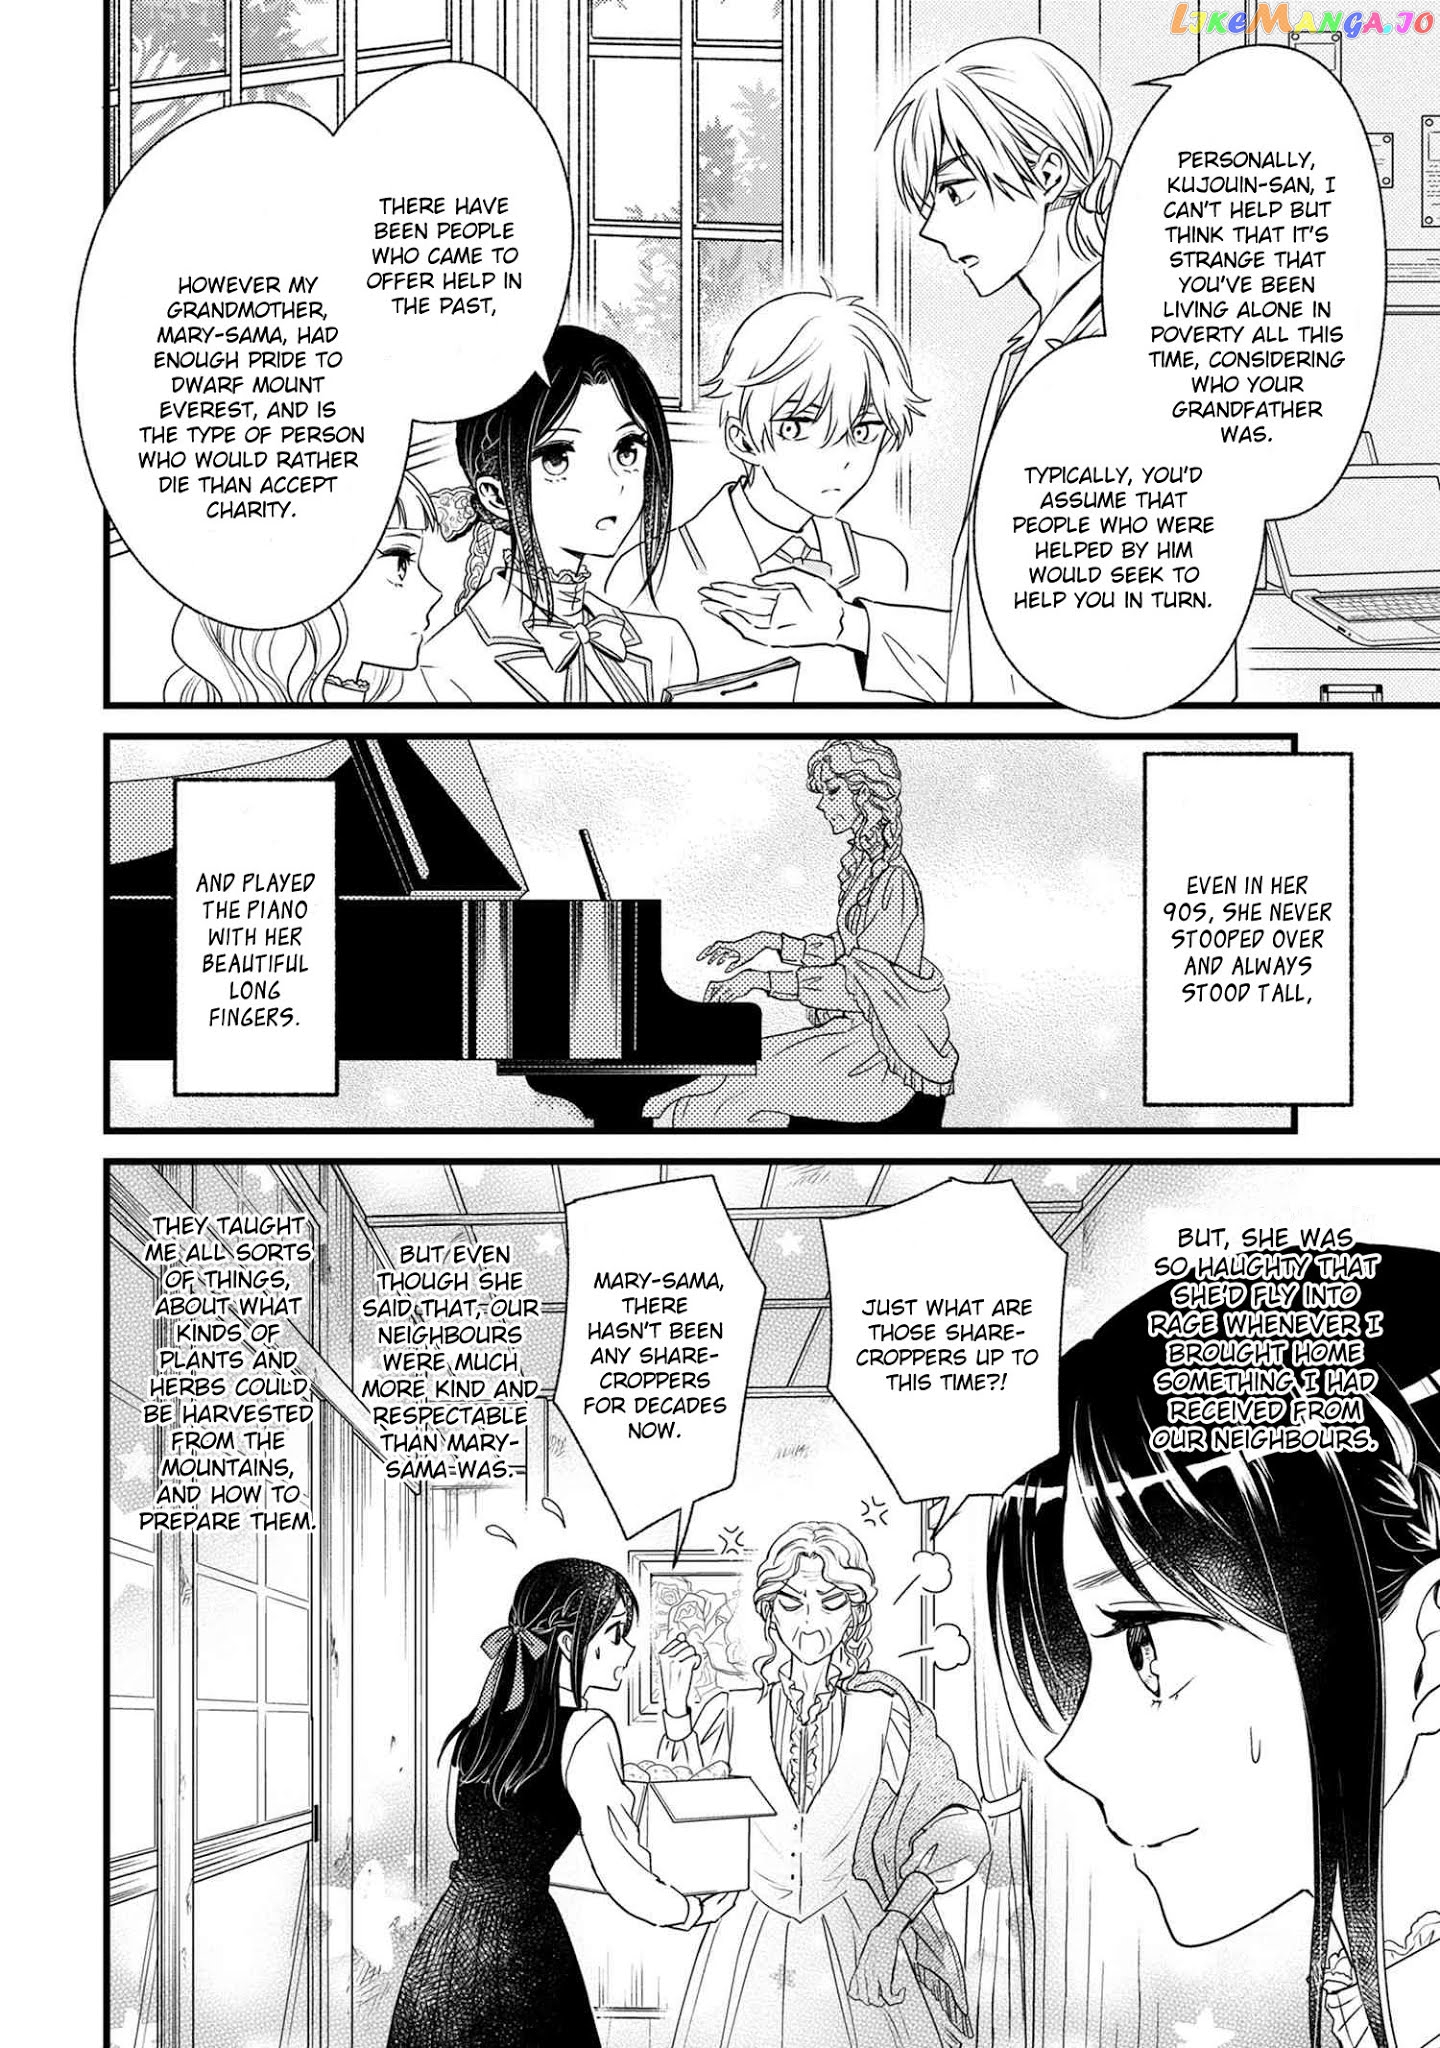 Reiko's Style: Despite Being Mistaken For A Rich Villainess, She's Actually Just Penniless chapter 3 - page 19